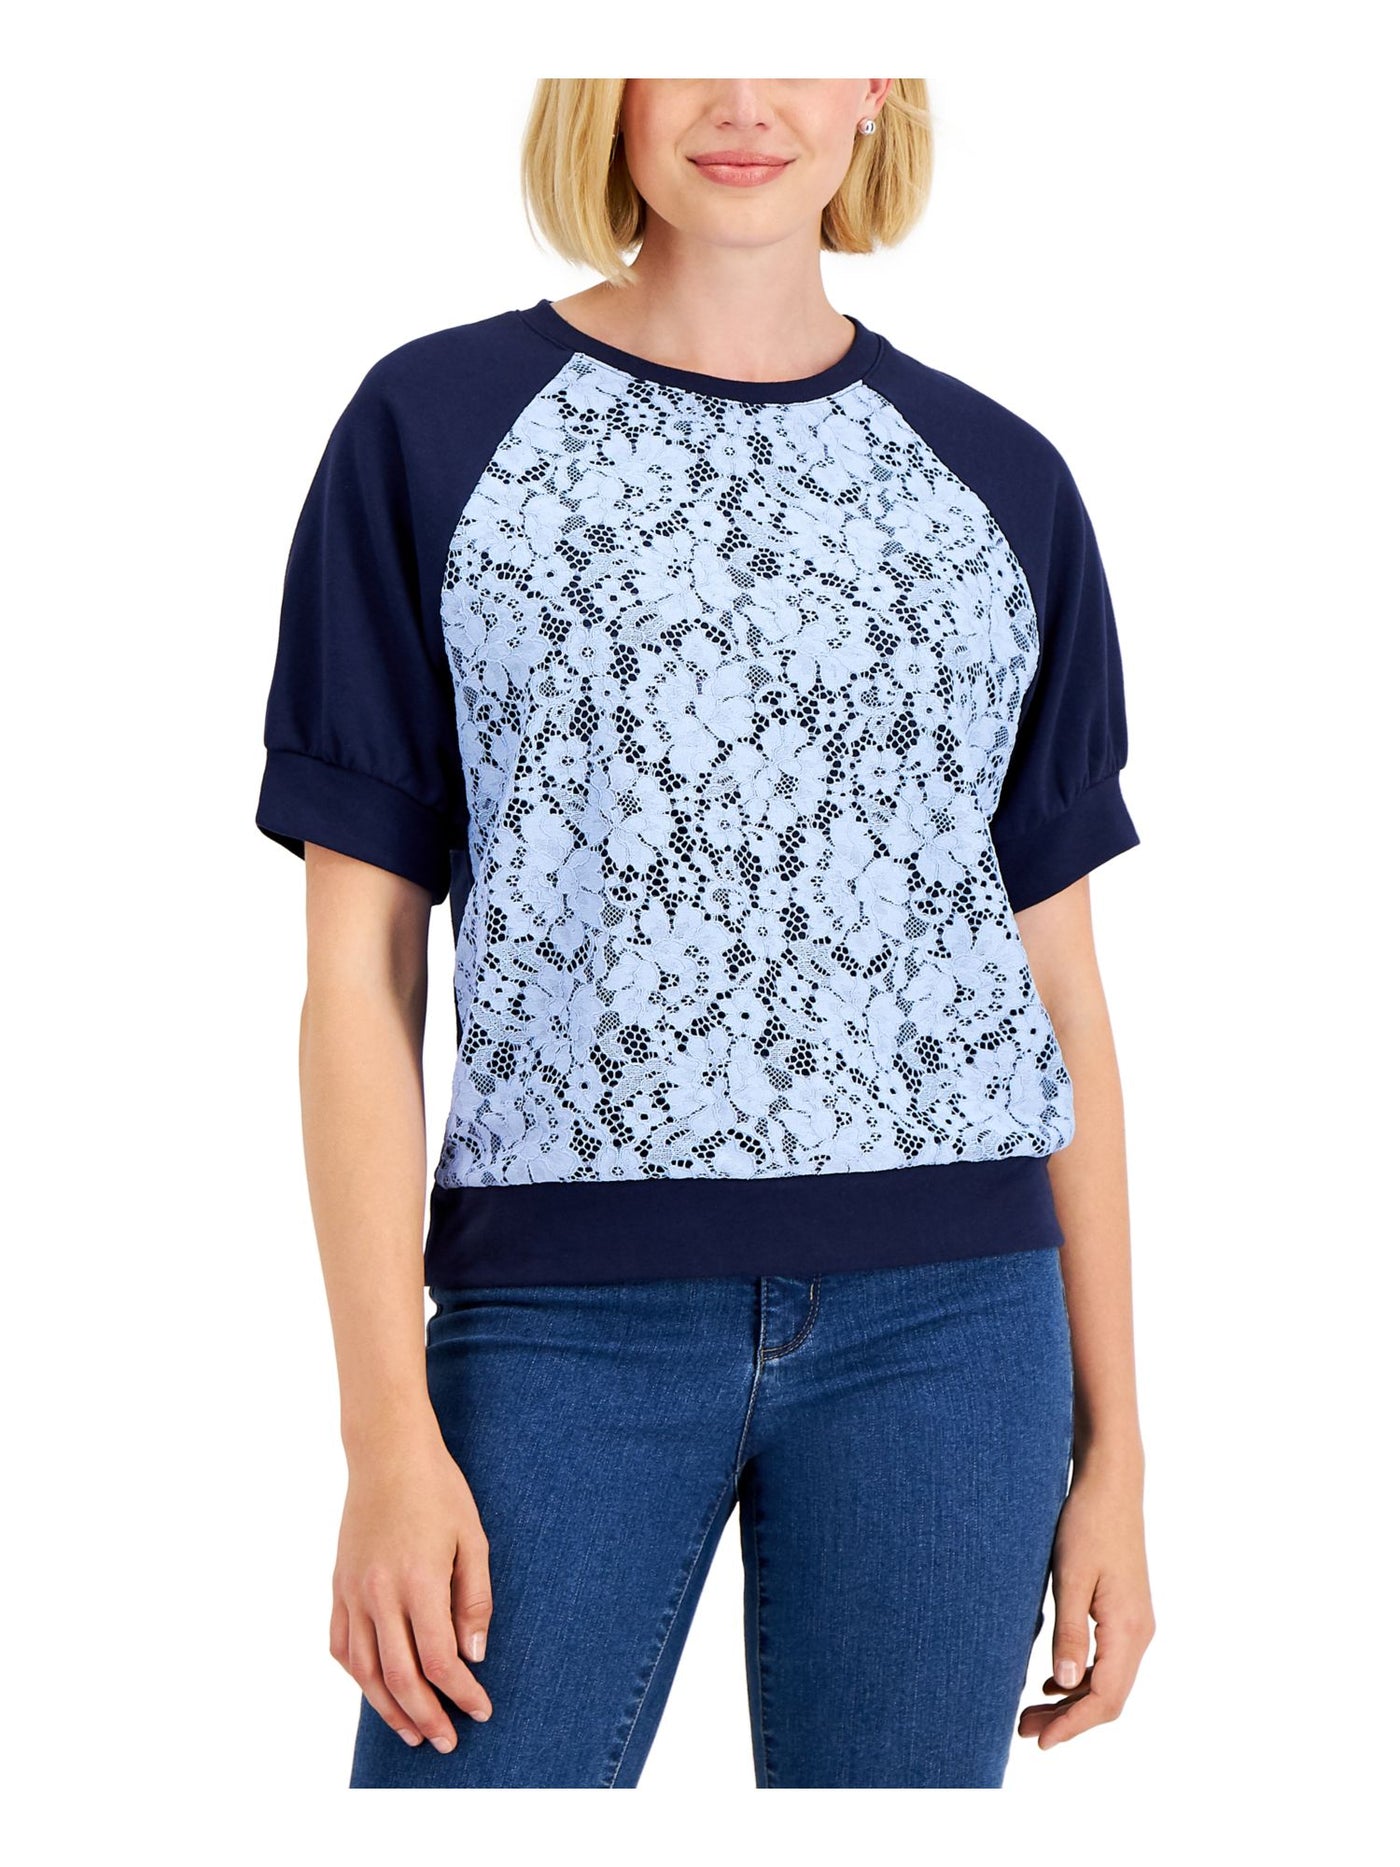 CHARTER CLUB Womens Blue Lace Baseball Style Short Sleeve Crew Neck Top XS